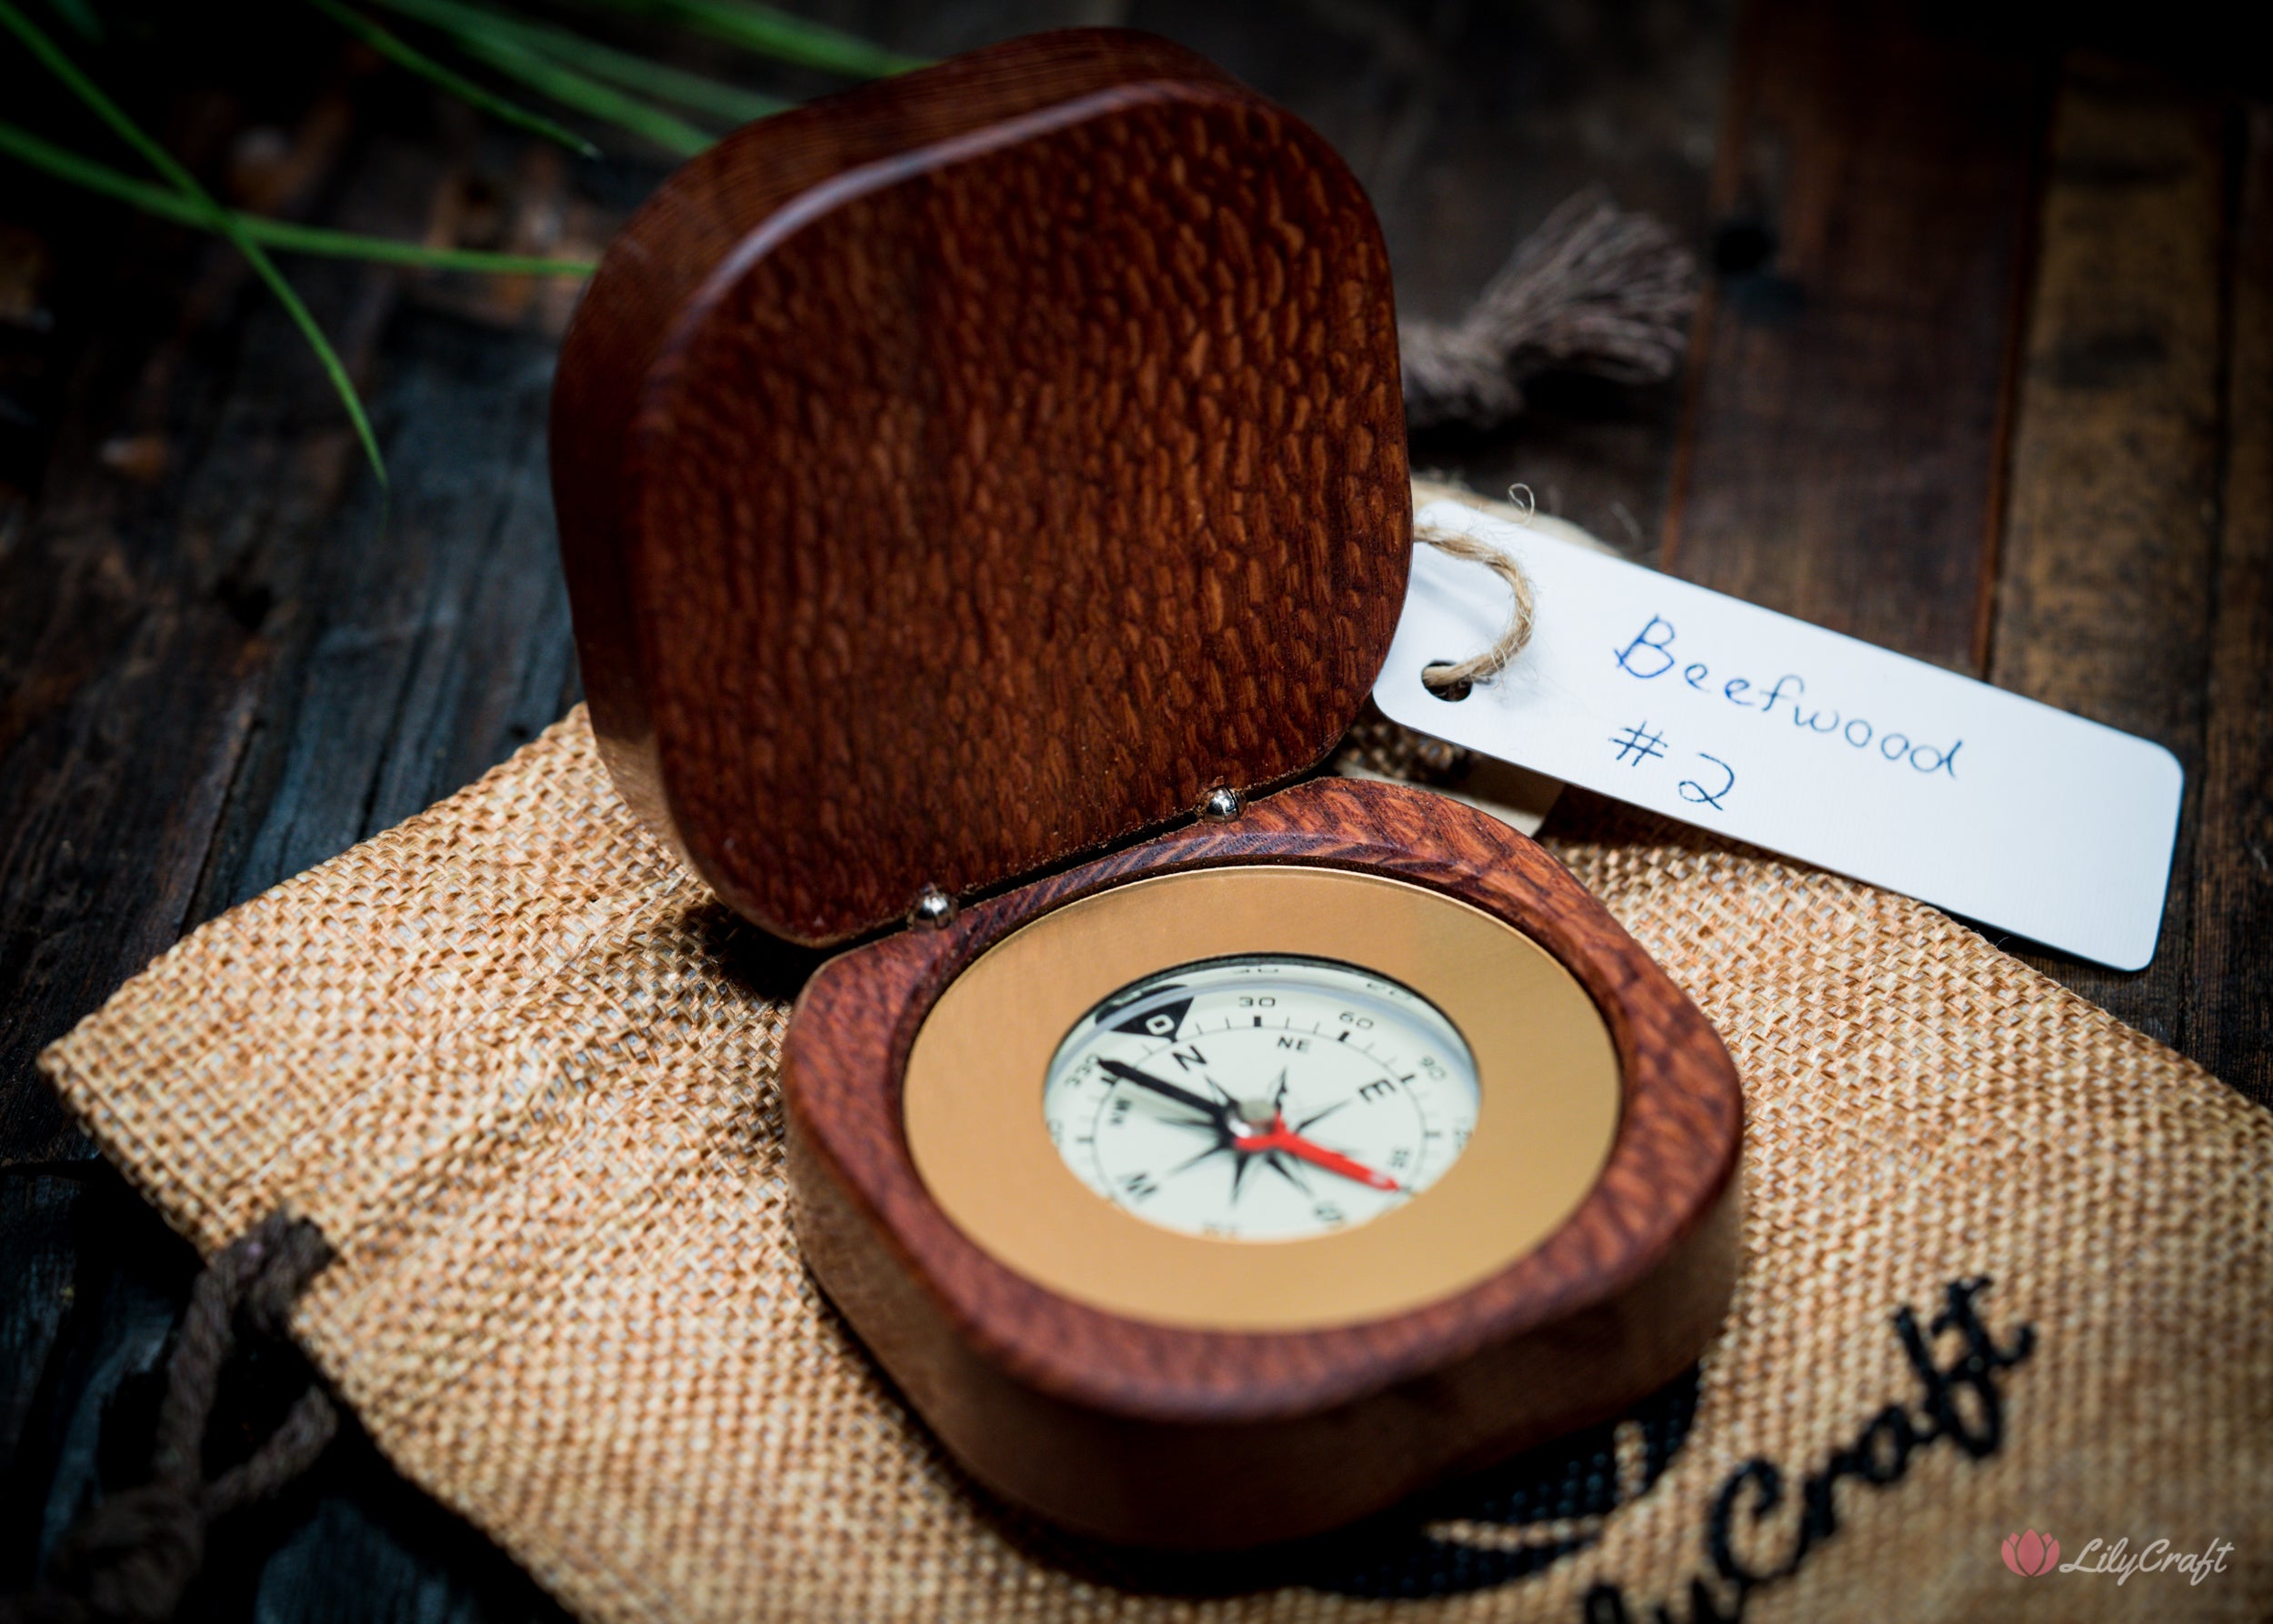 Personalized compass, the perfect retirement memento